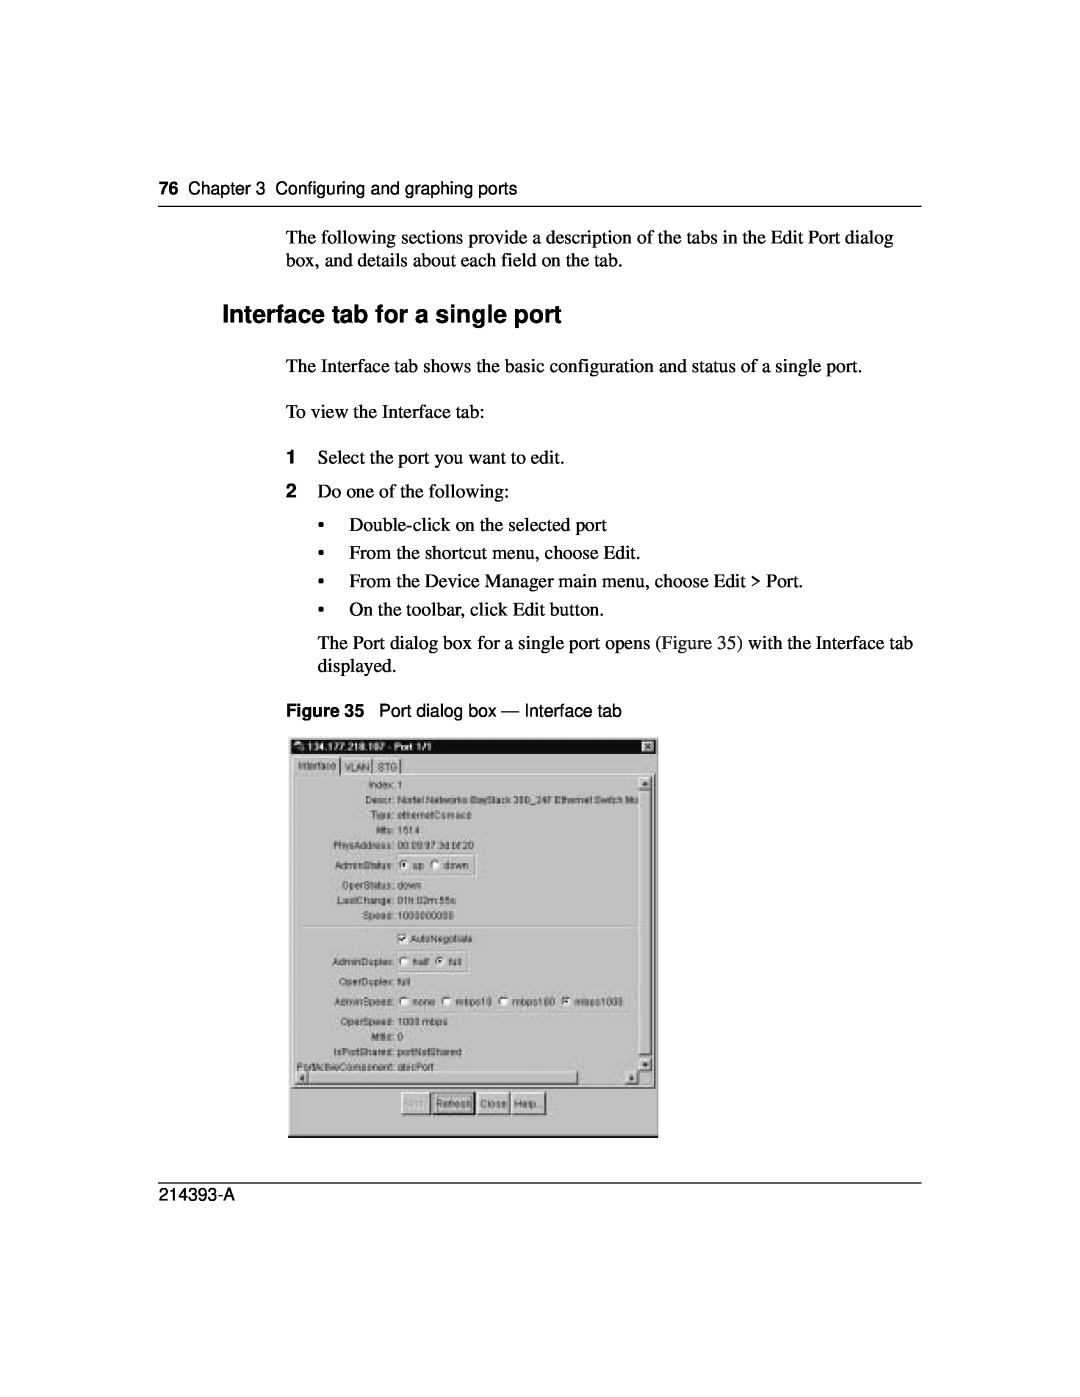 Nortel Networks 214393-A manual Interface tab for a single port 